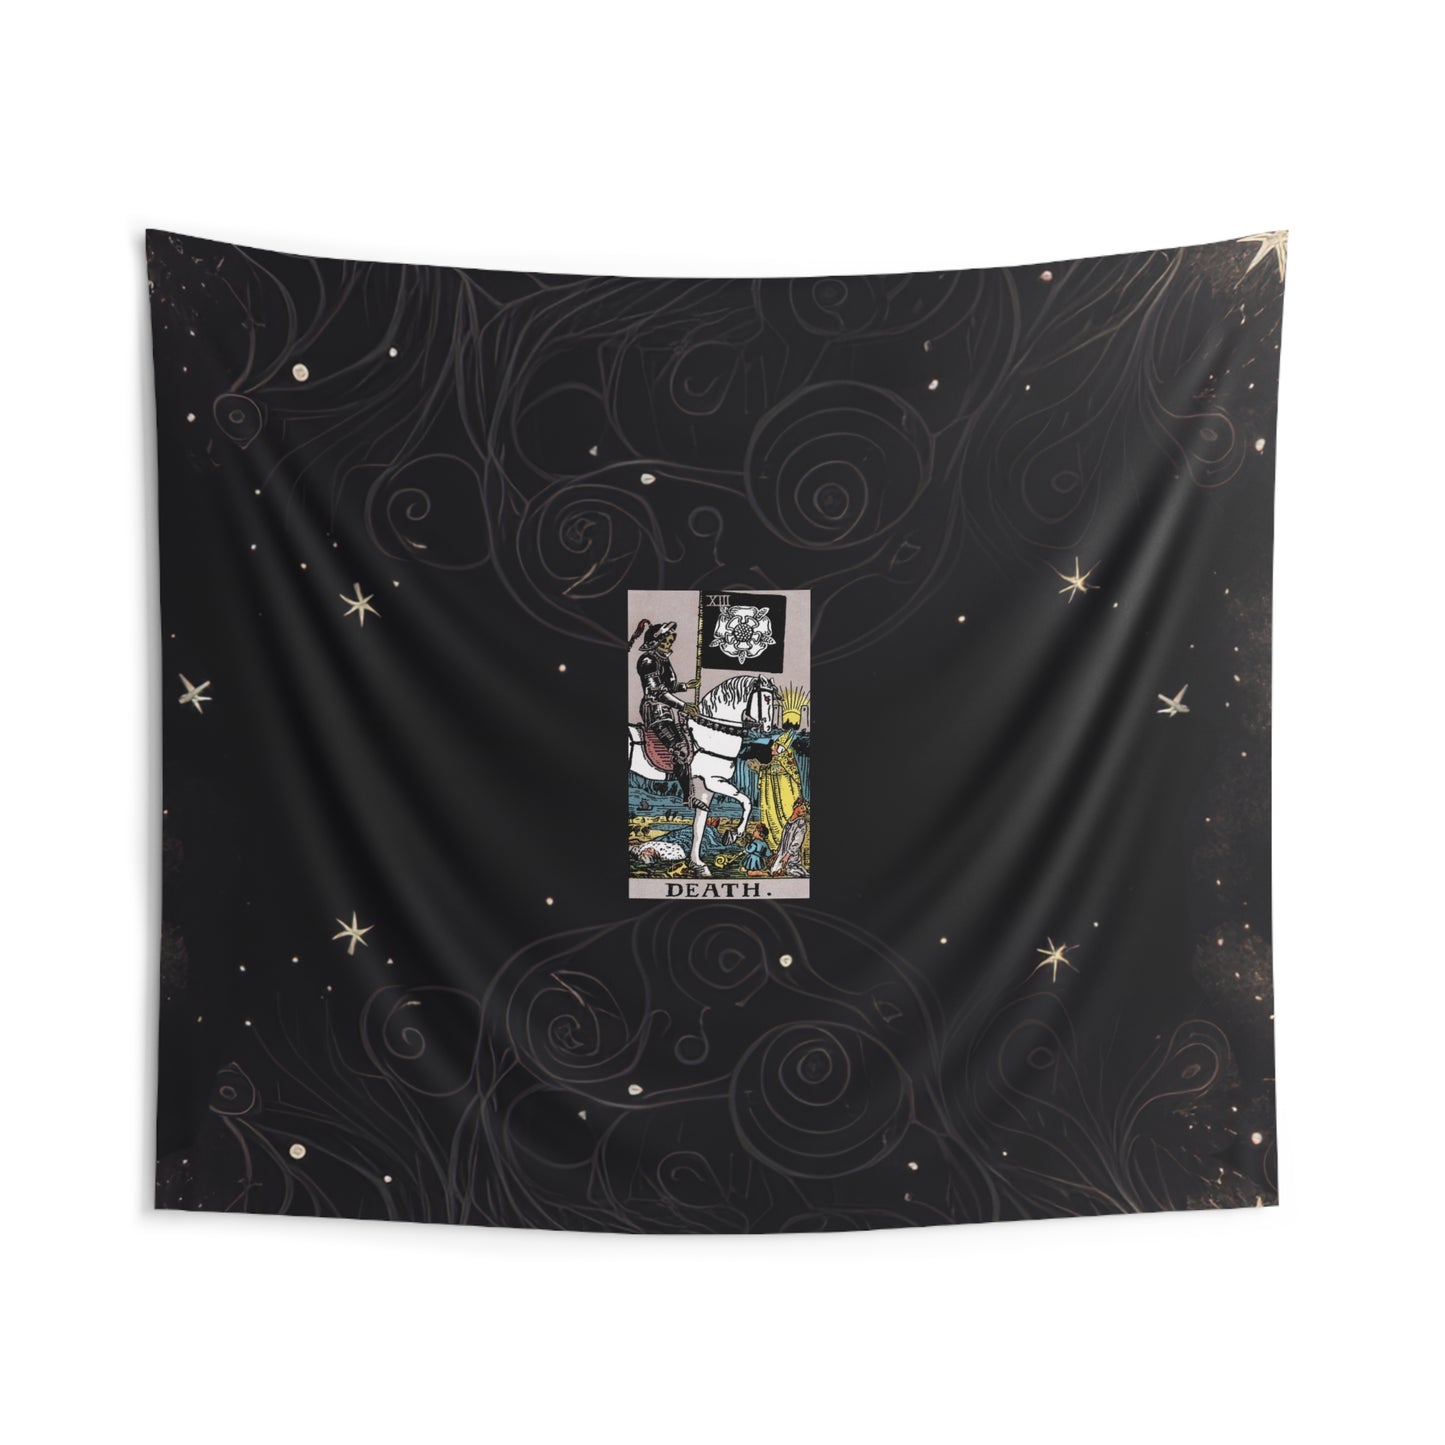 The Death Tarot Card Altar Cloth or Tapestry with Starry Background